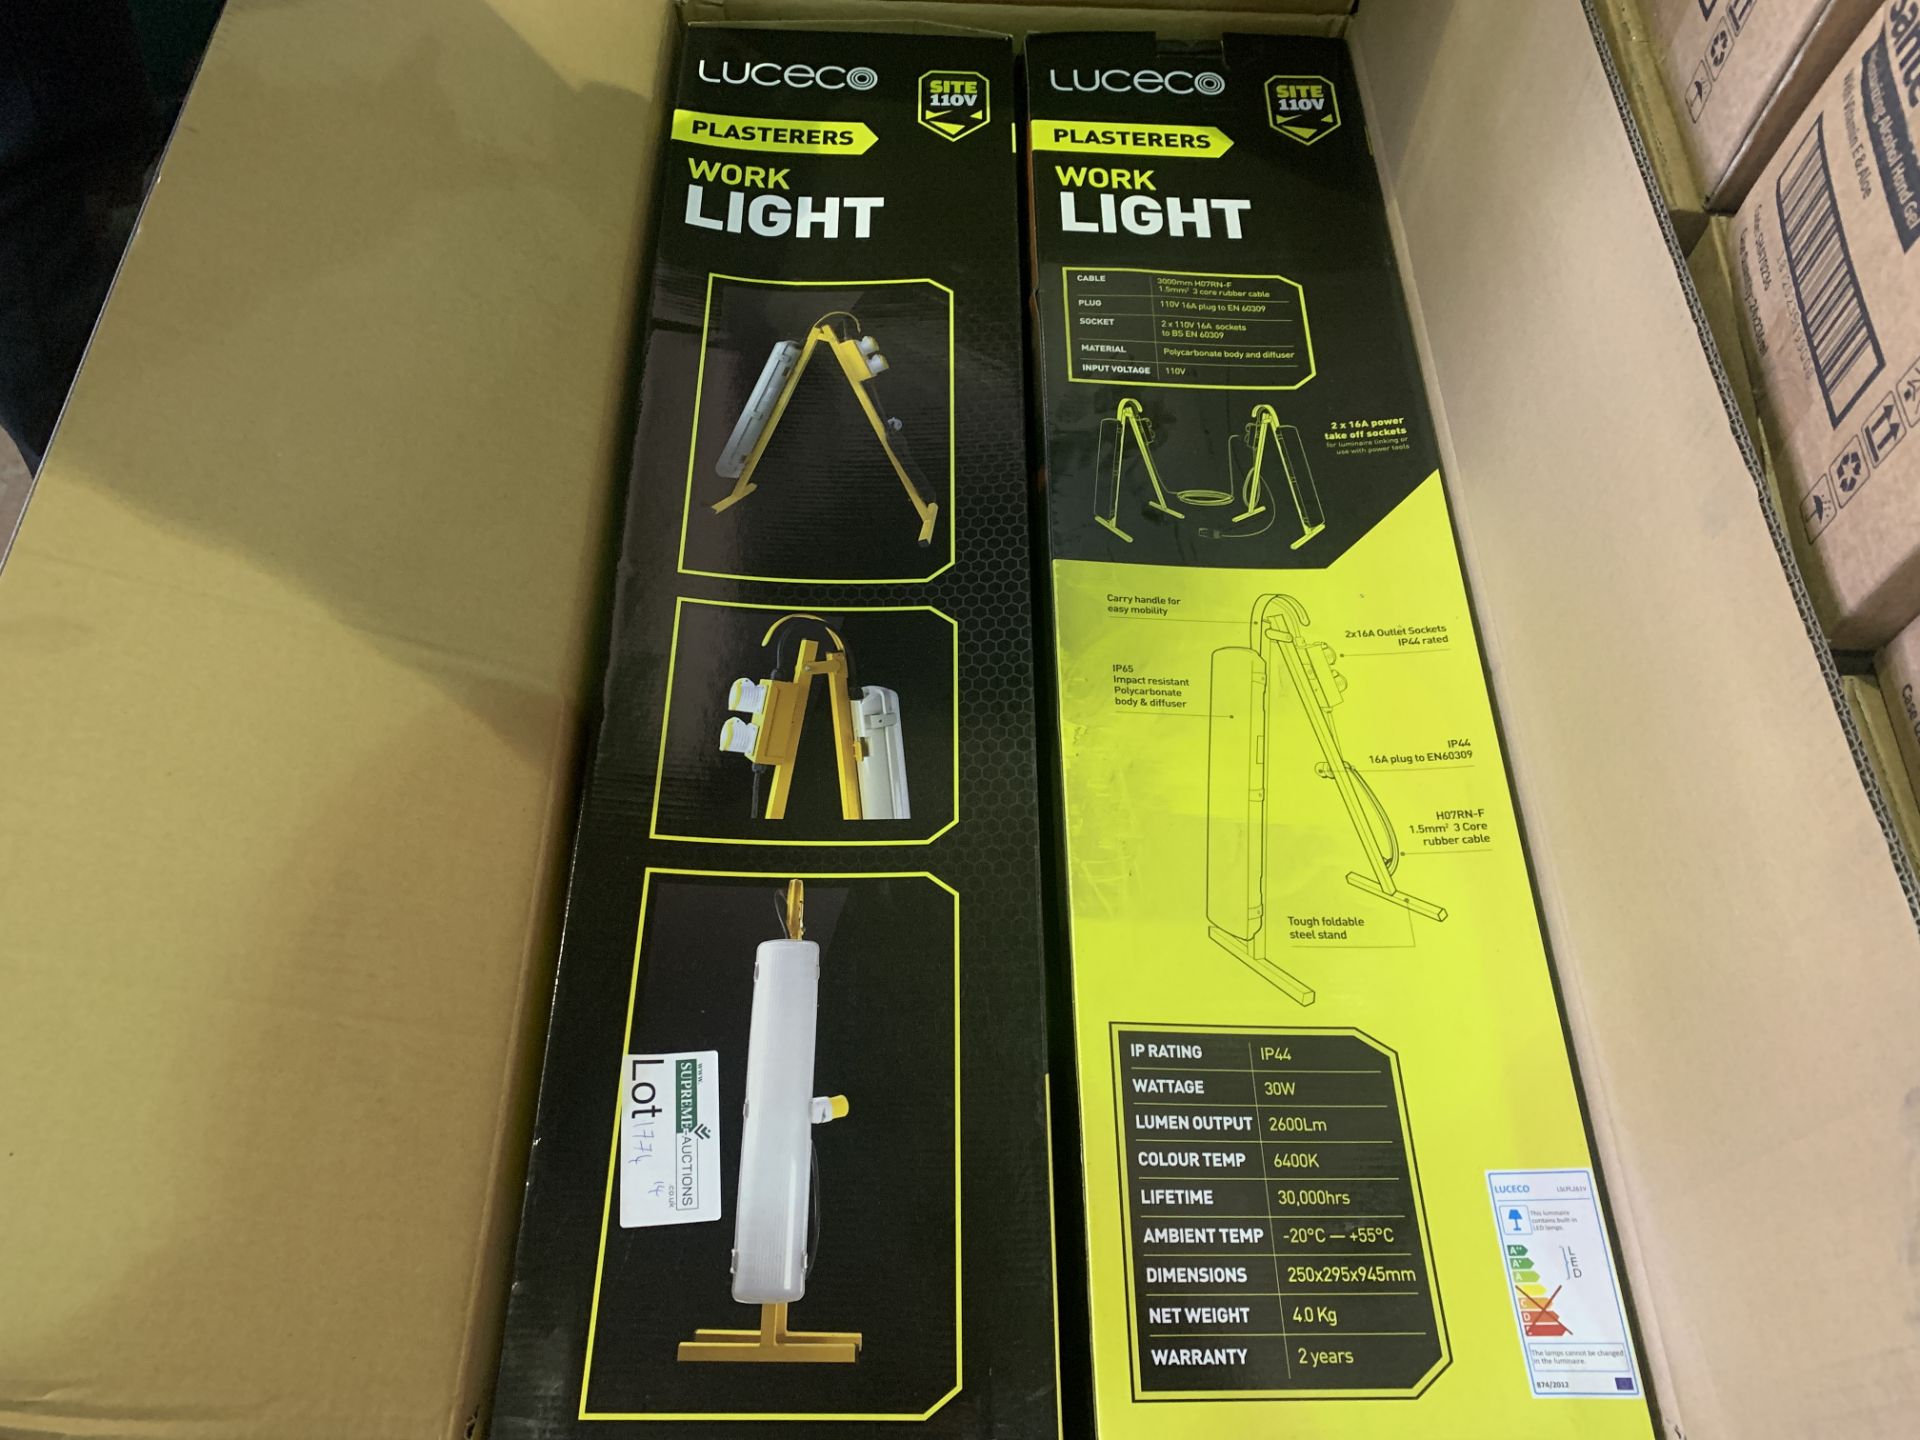 2 X BRAND NEW LUCECO SITE 110V PLASTERES WORK LIGHTS RRP £80 EACH R18